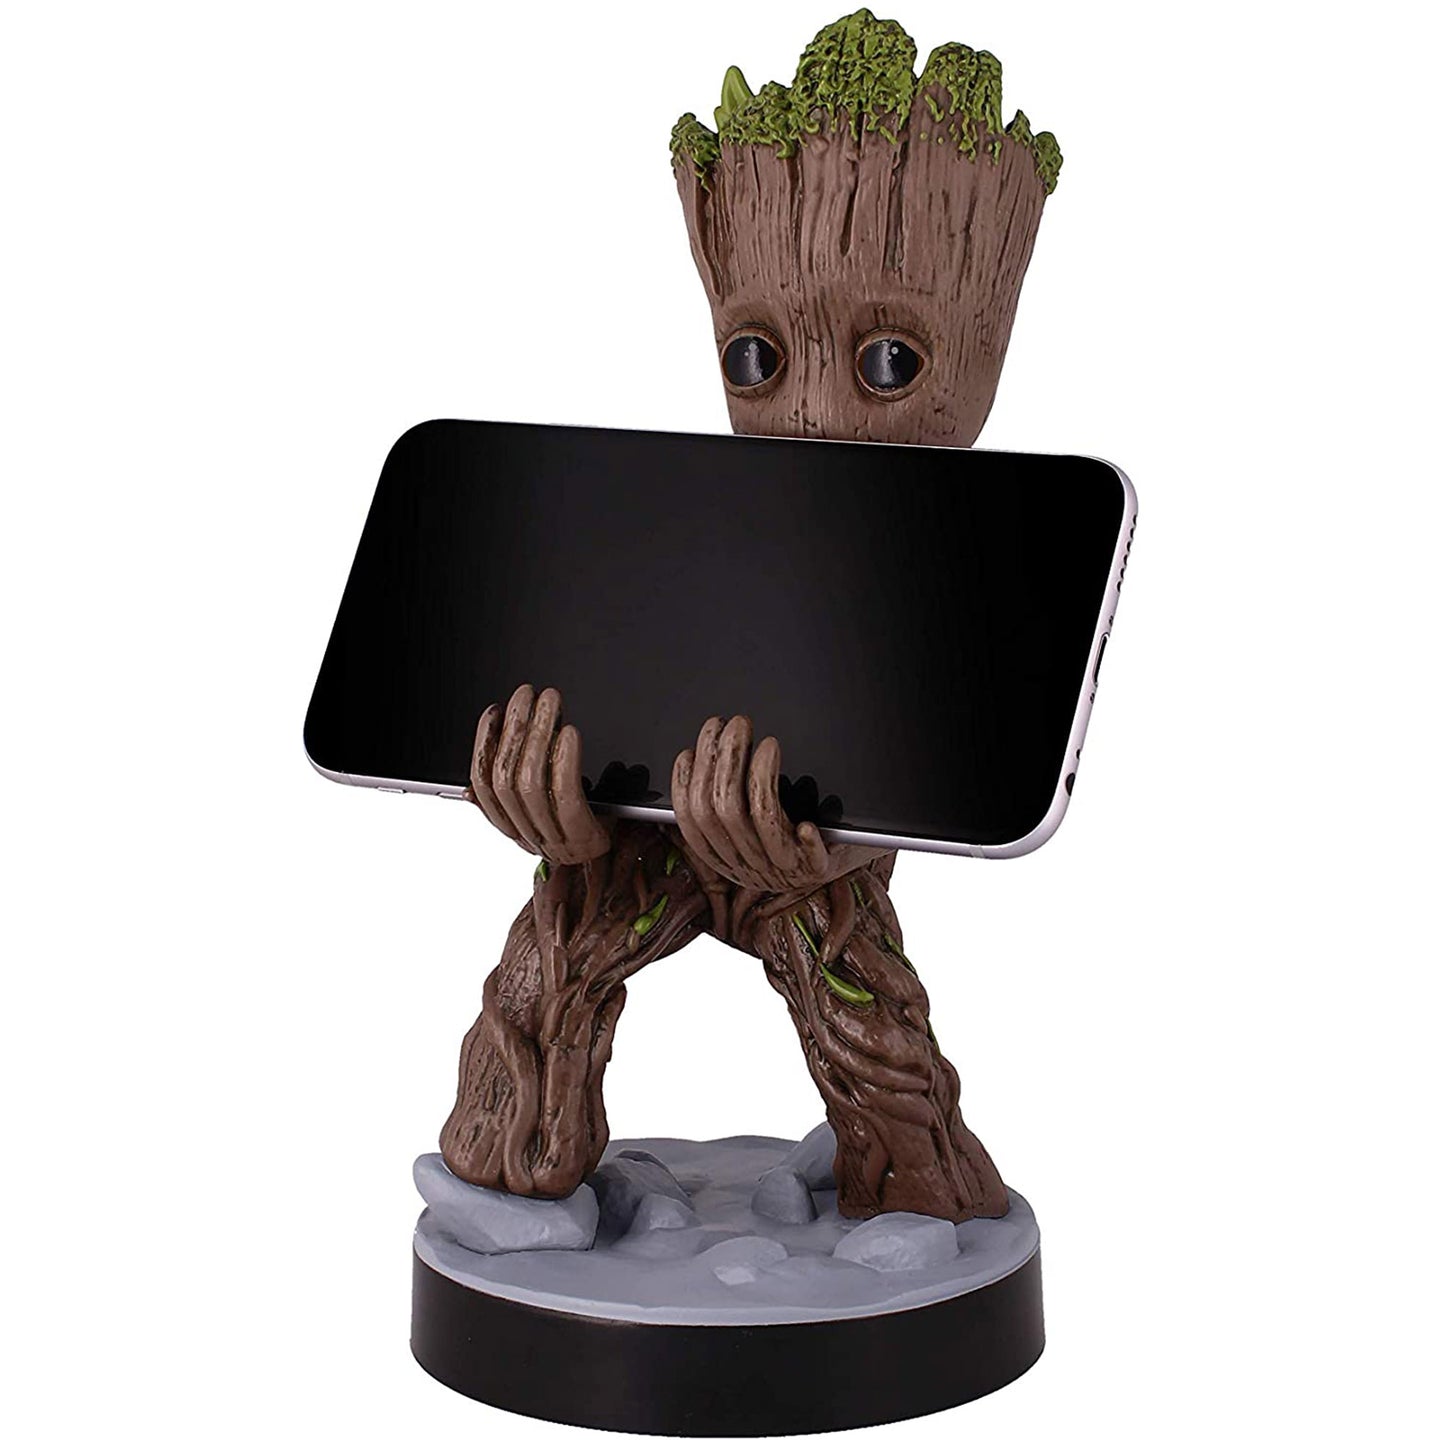 Marvel Avengers Baby Groot Cable Guy Holding an IPhone | Happy Piranha